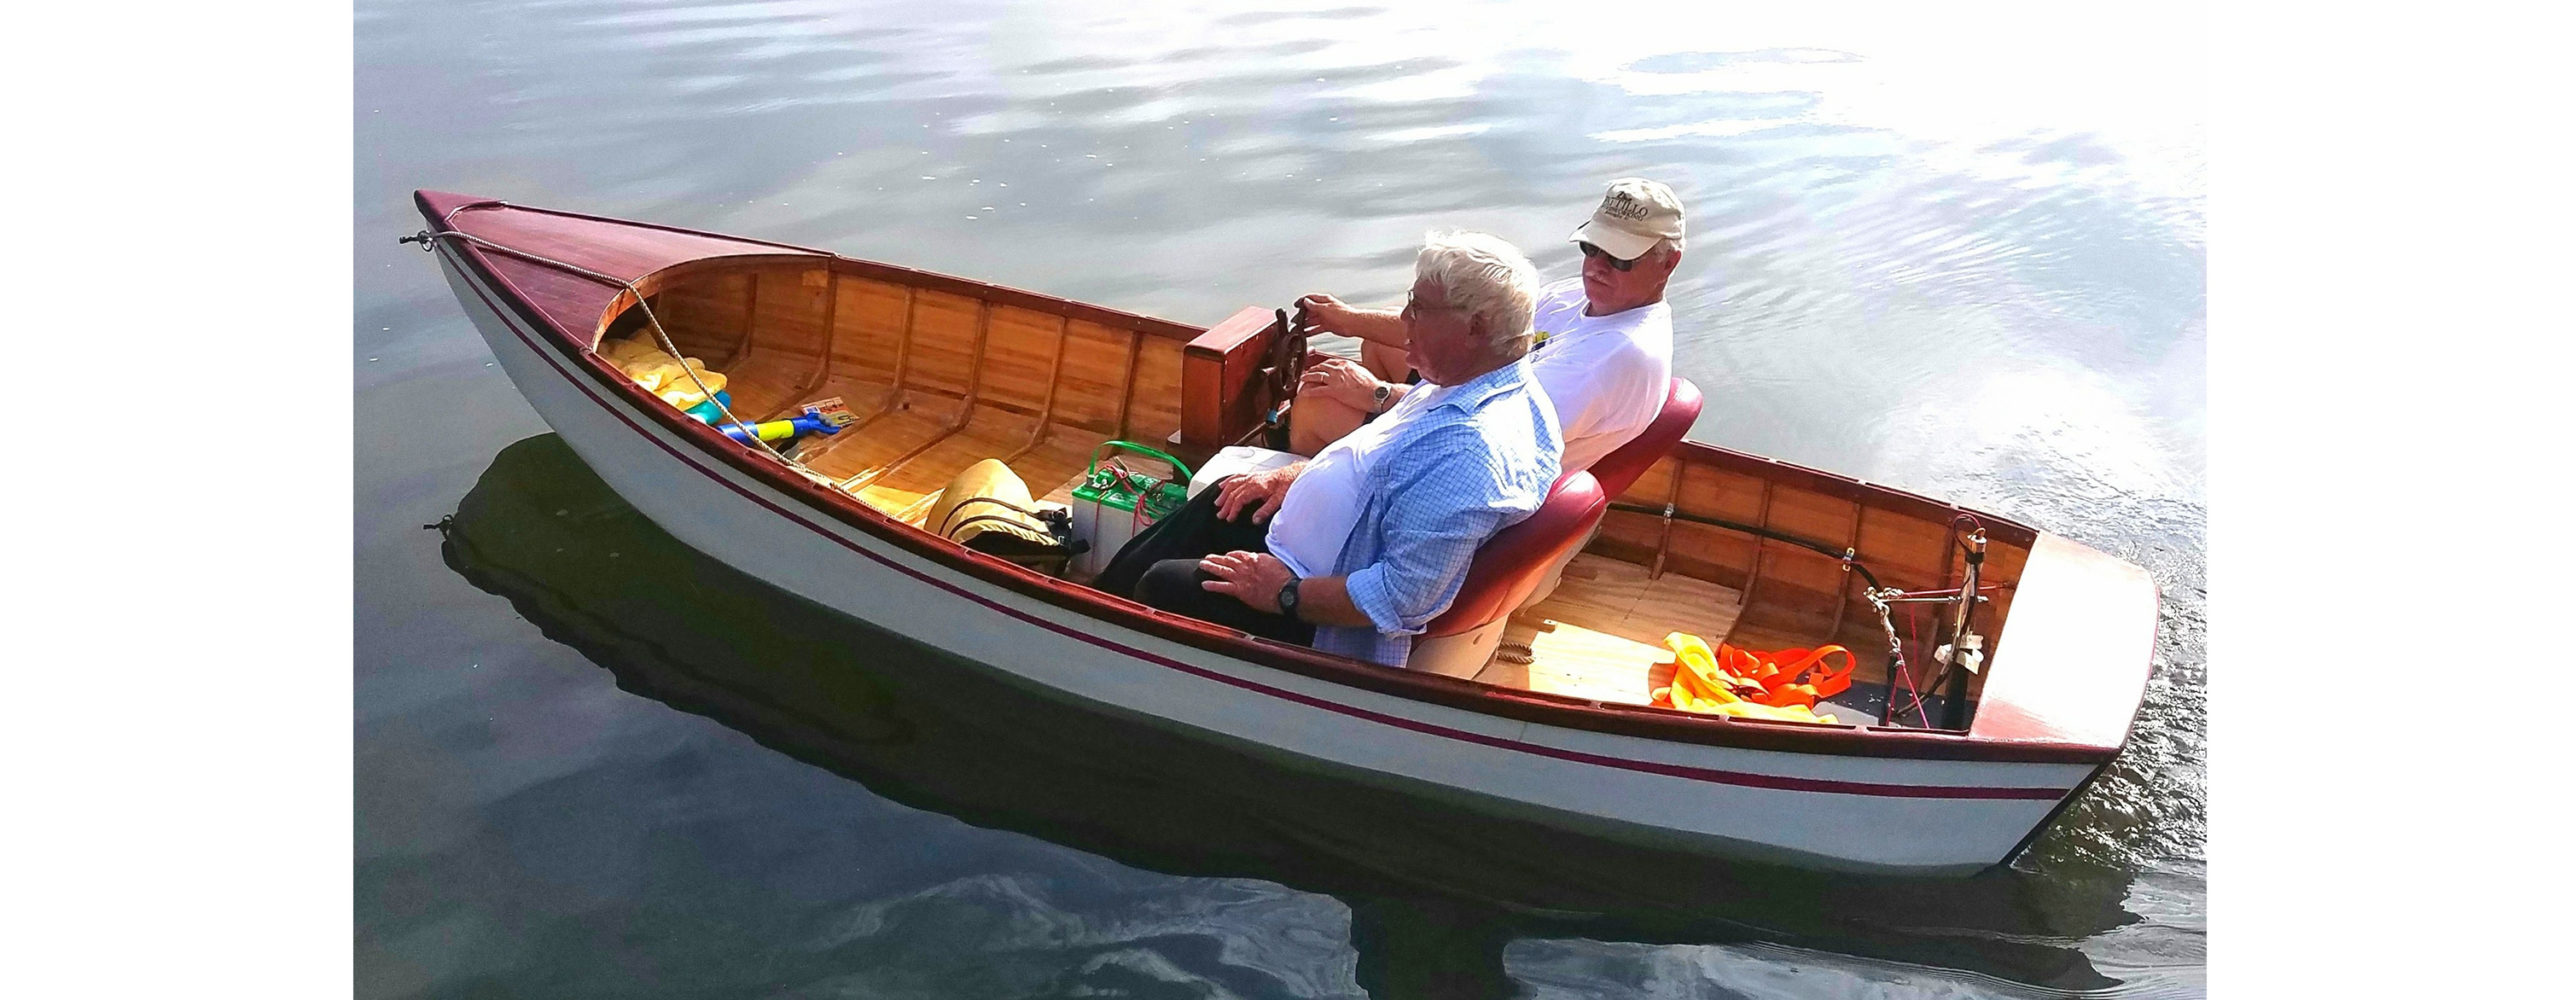 Peel and Stick Vinyl Seat Repair, Anyone? - The Hull Truth - Boating and  Fishing Forum